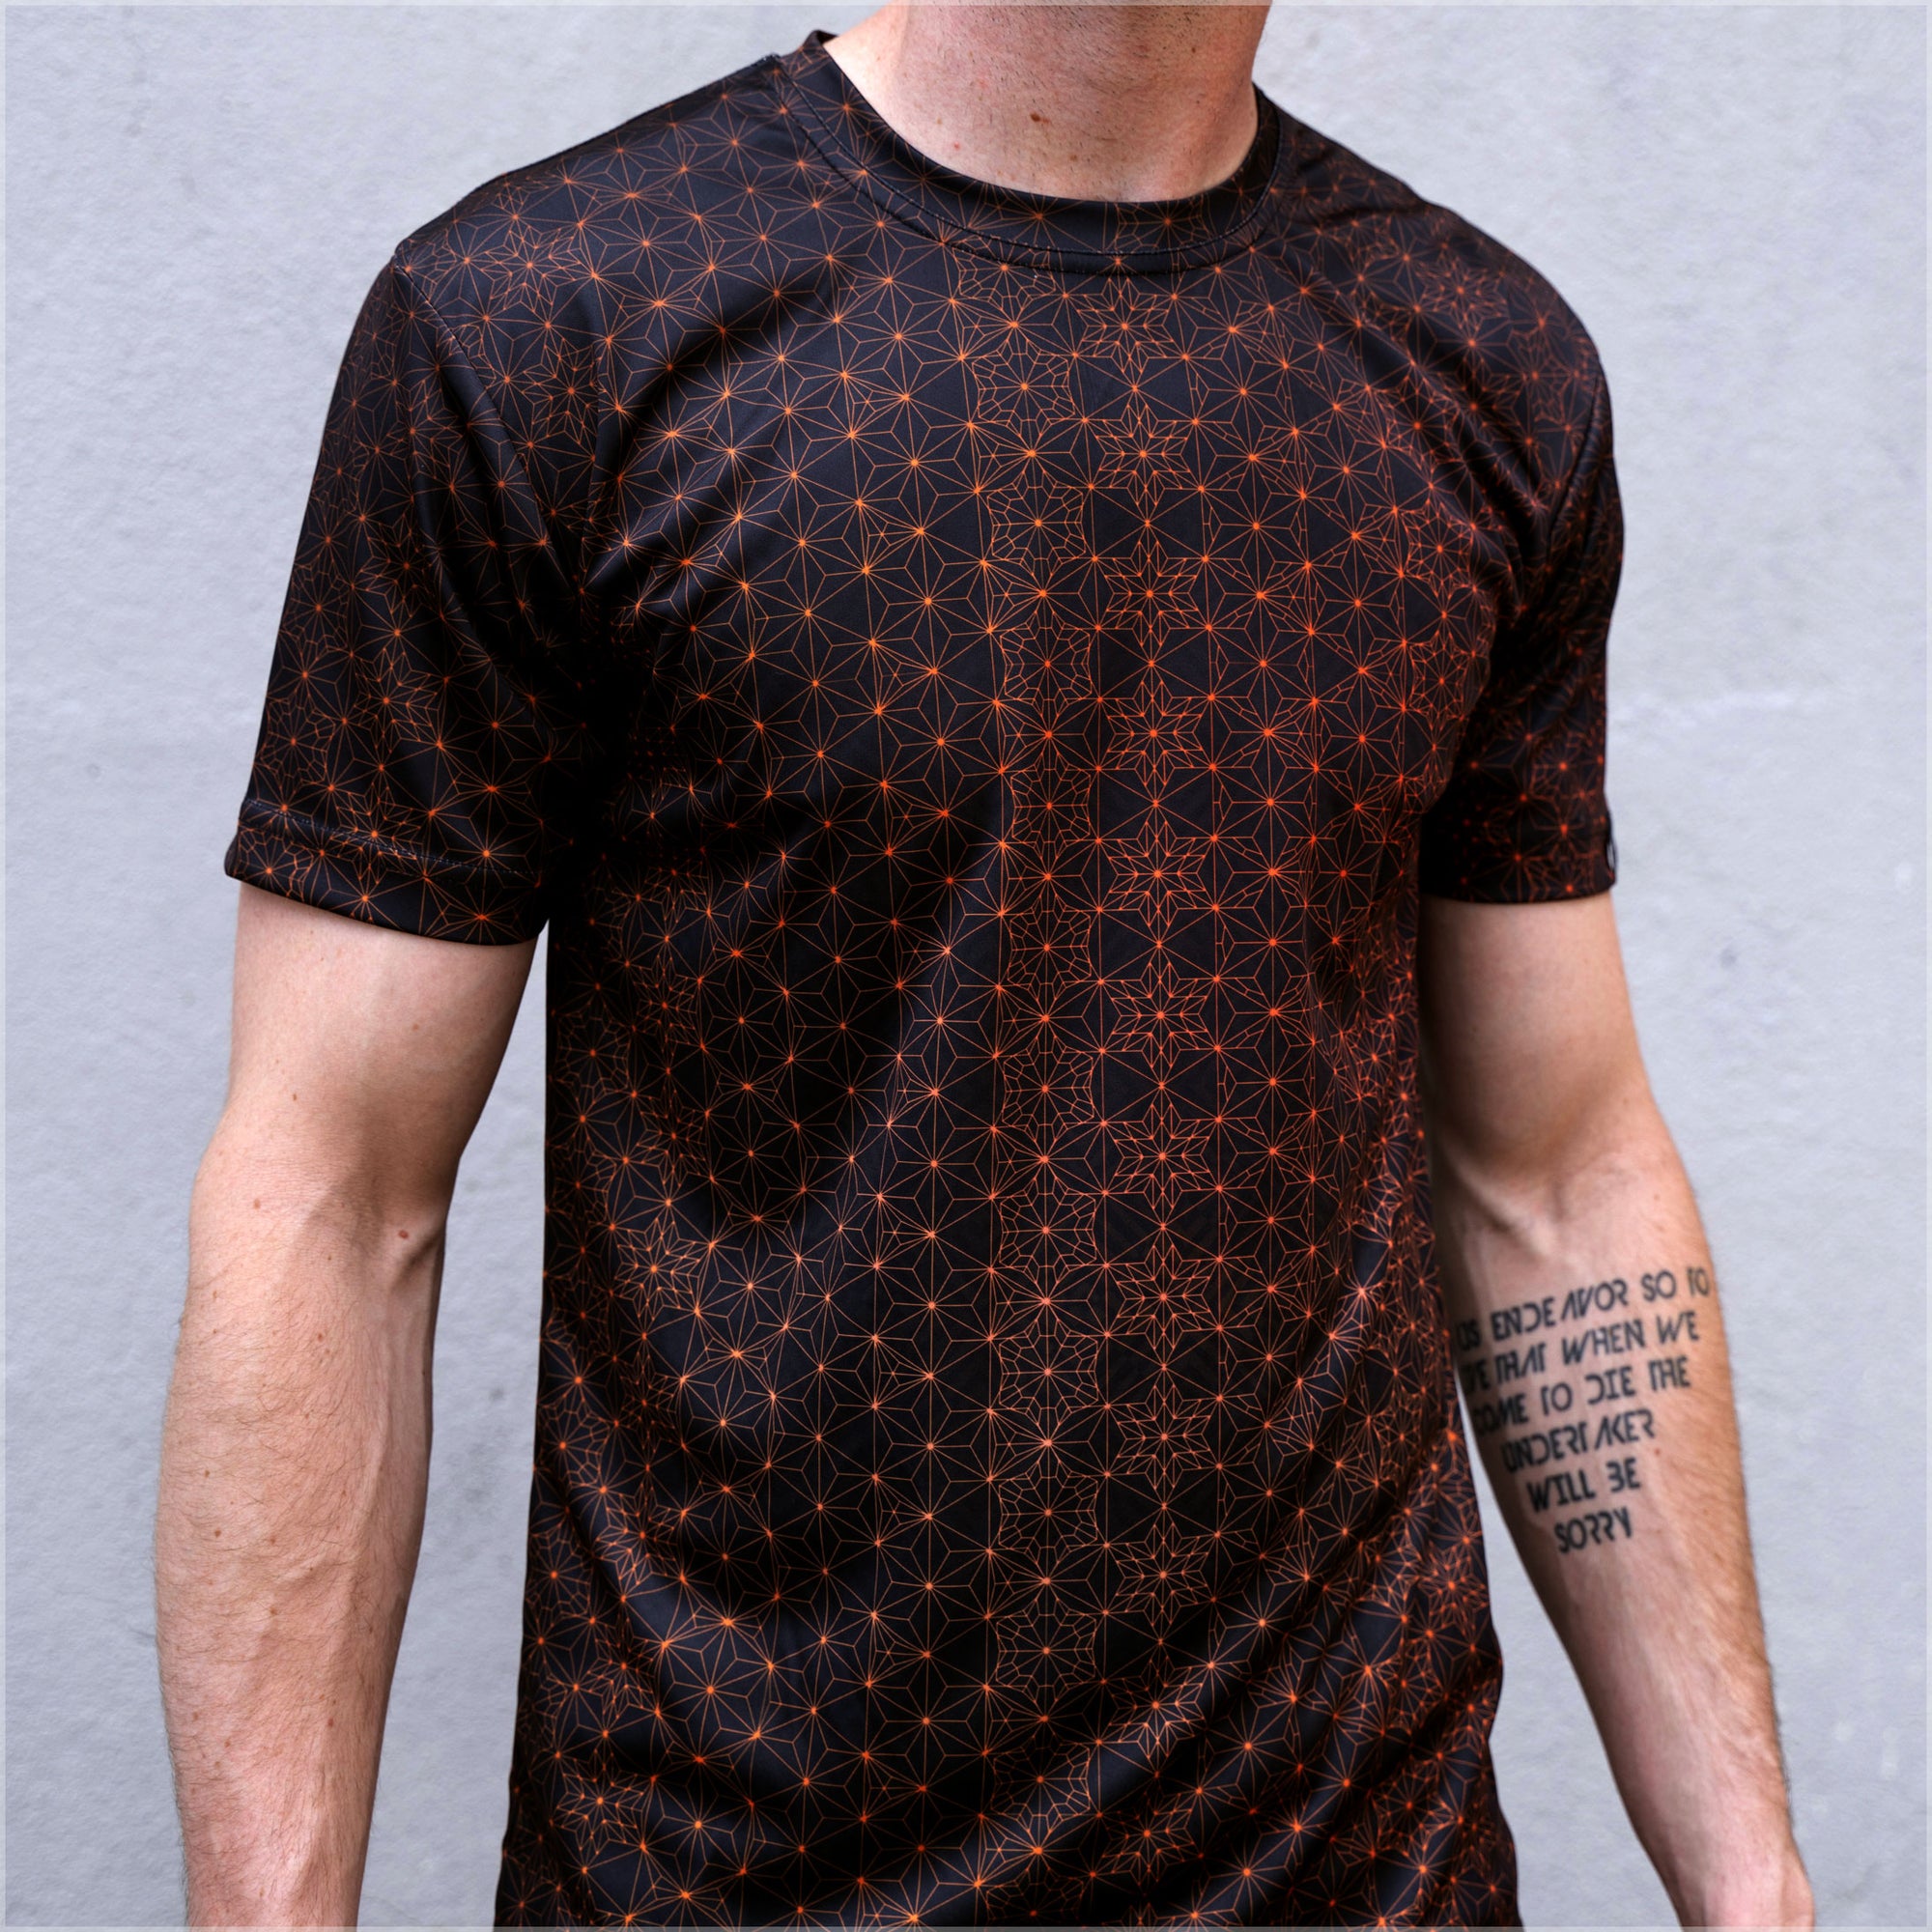 Starseed Red Sublimation Tee by Kimi Takemura